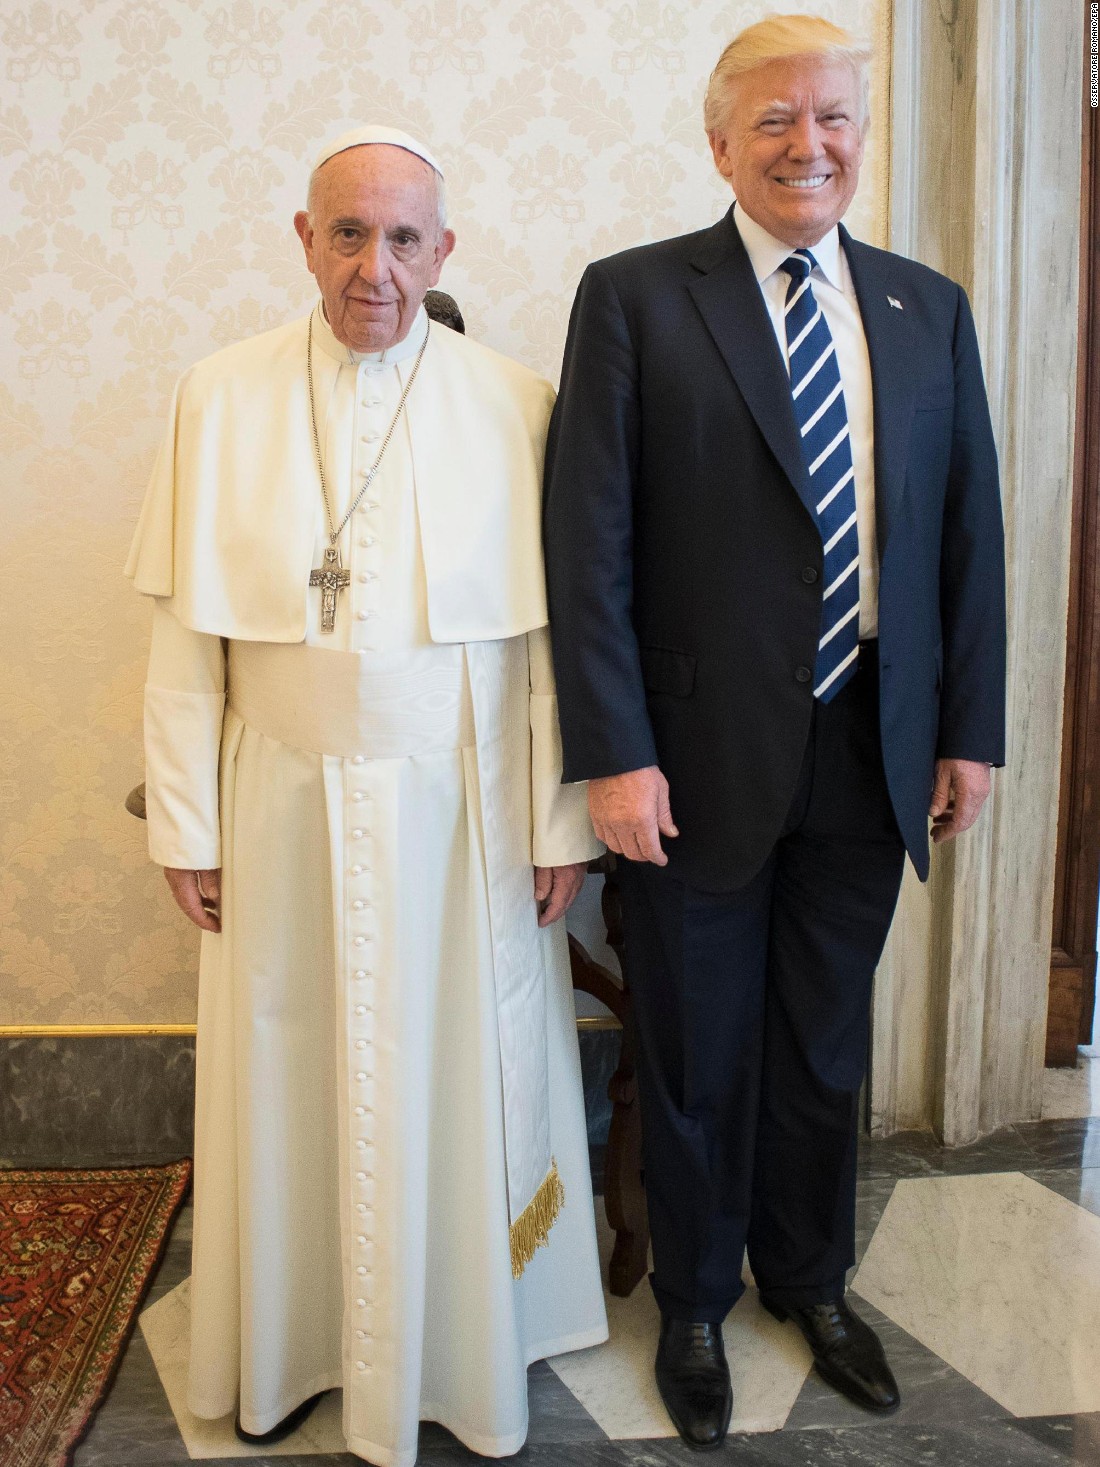 When The President Met The Pope